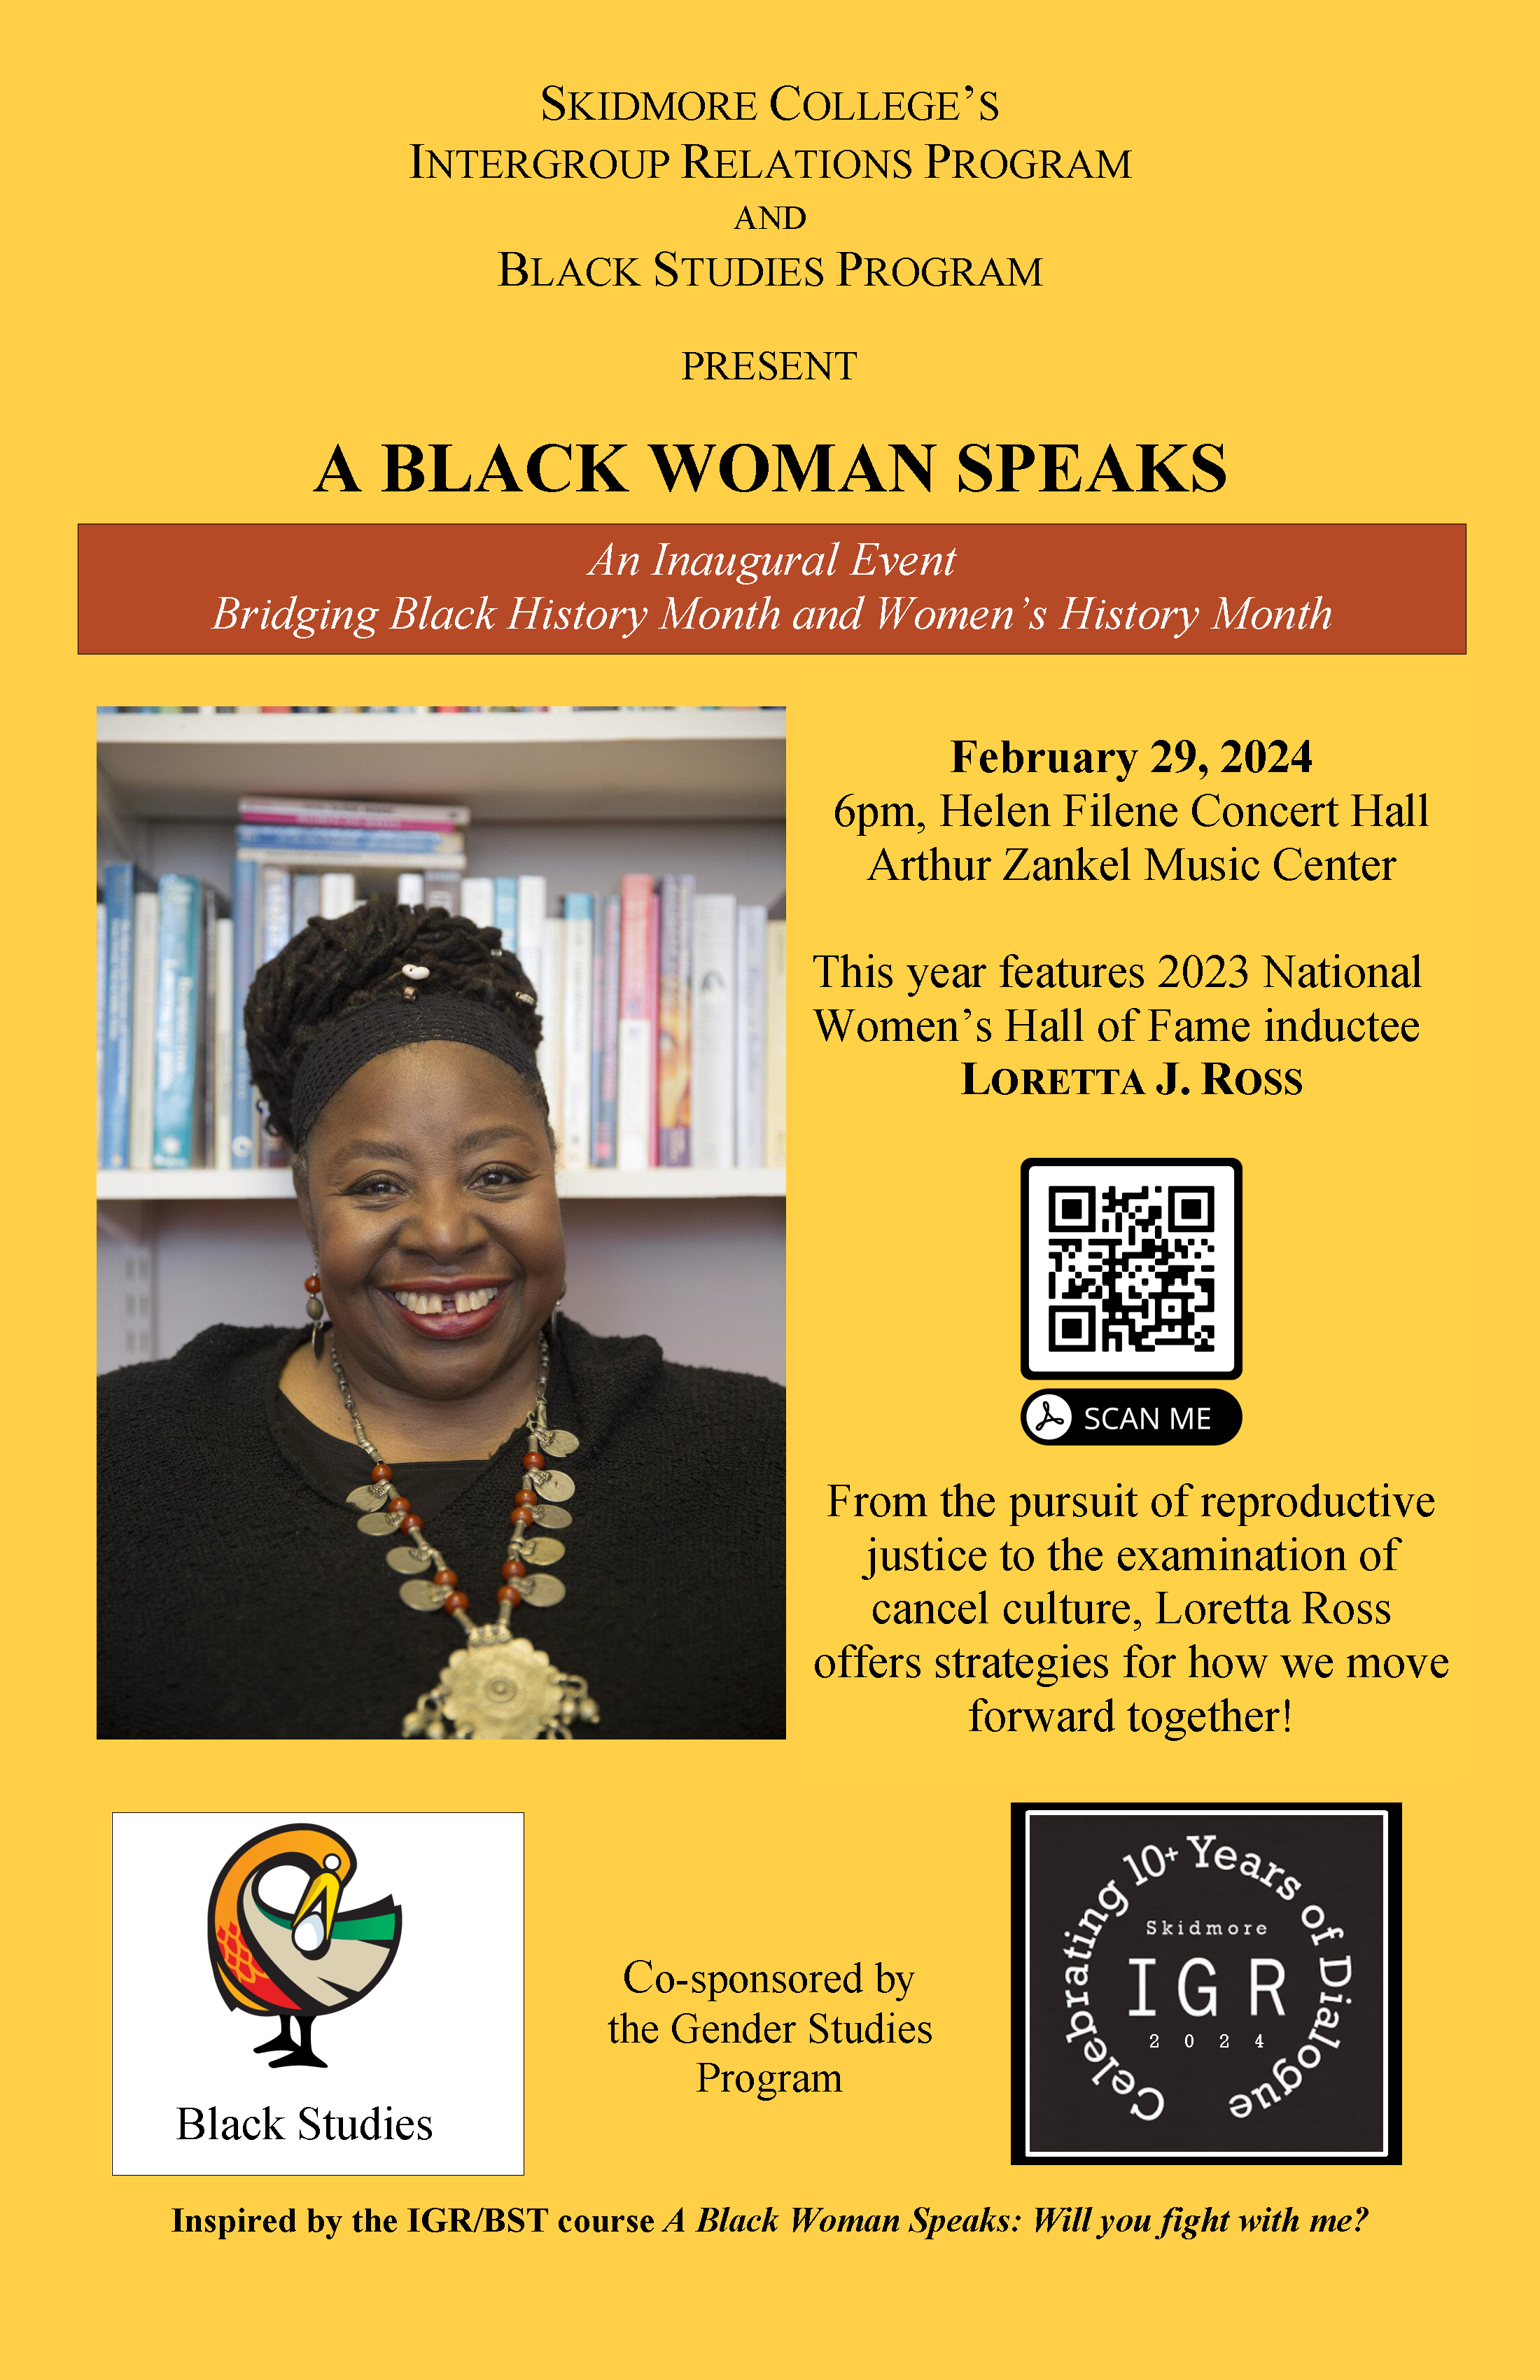 A Black Woman Speaks event poster